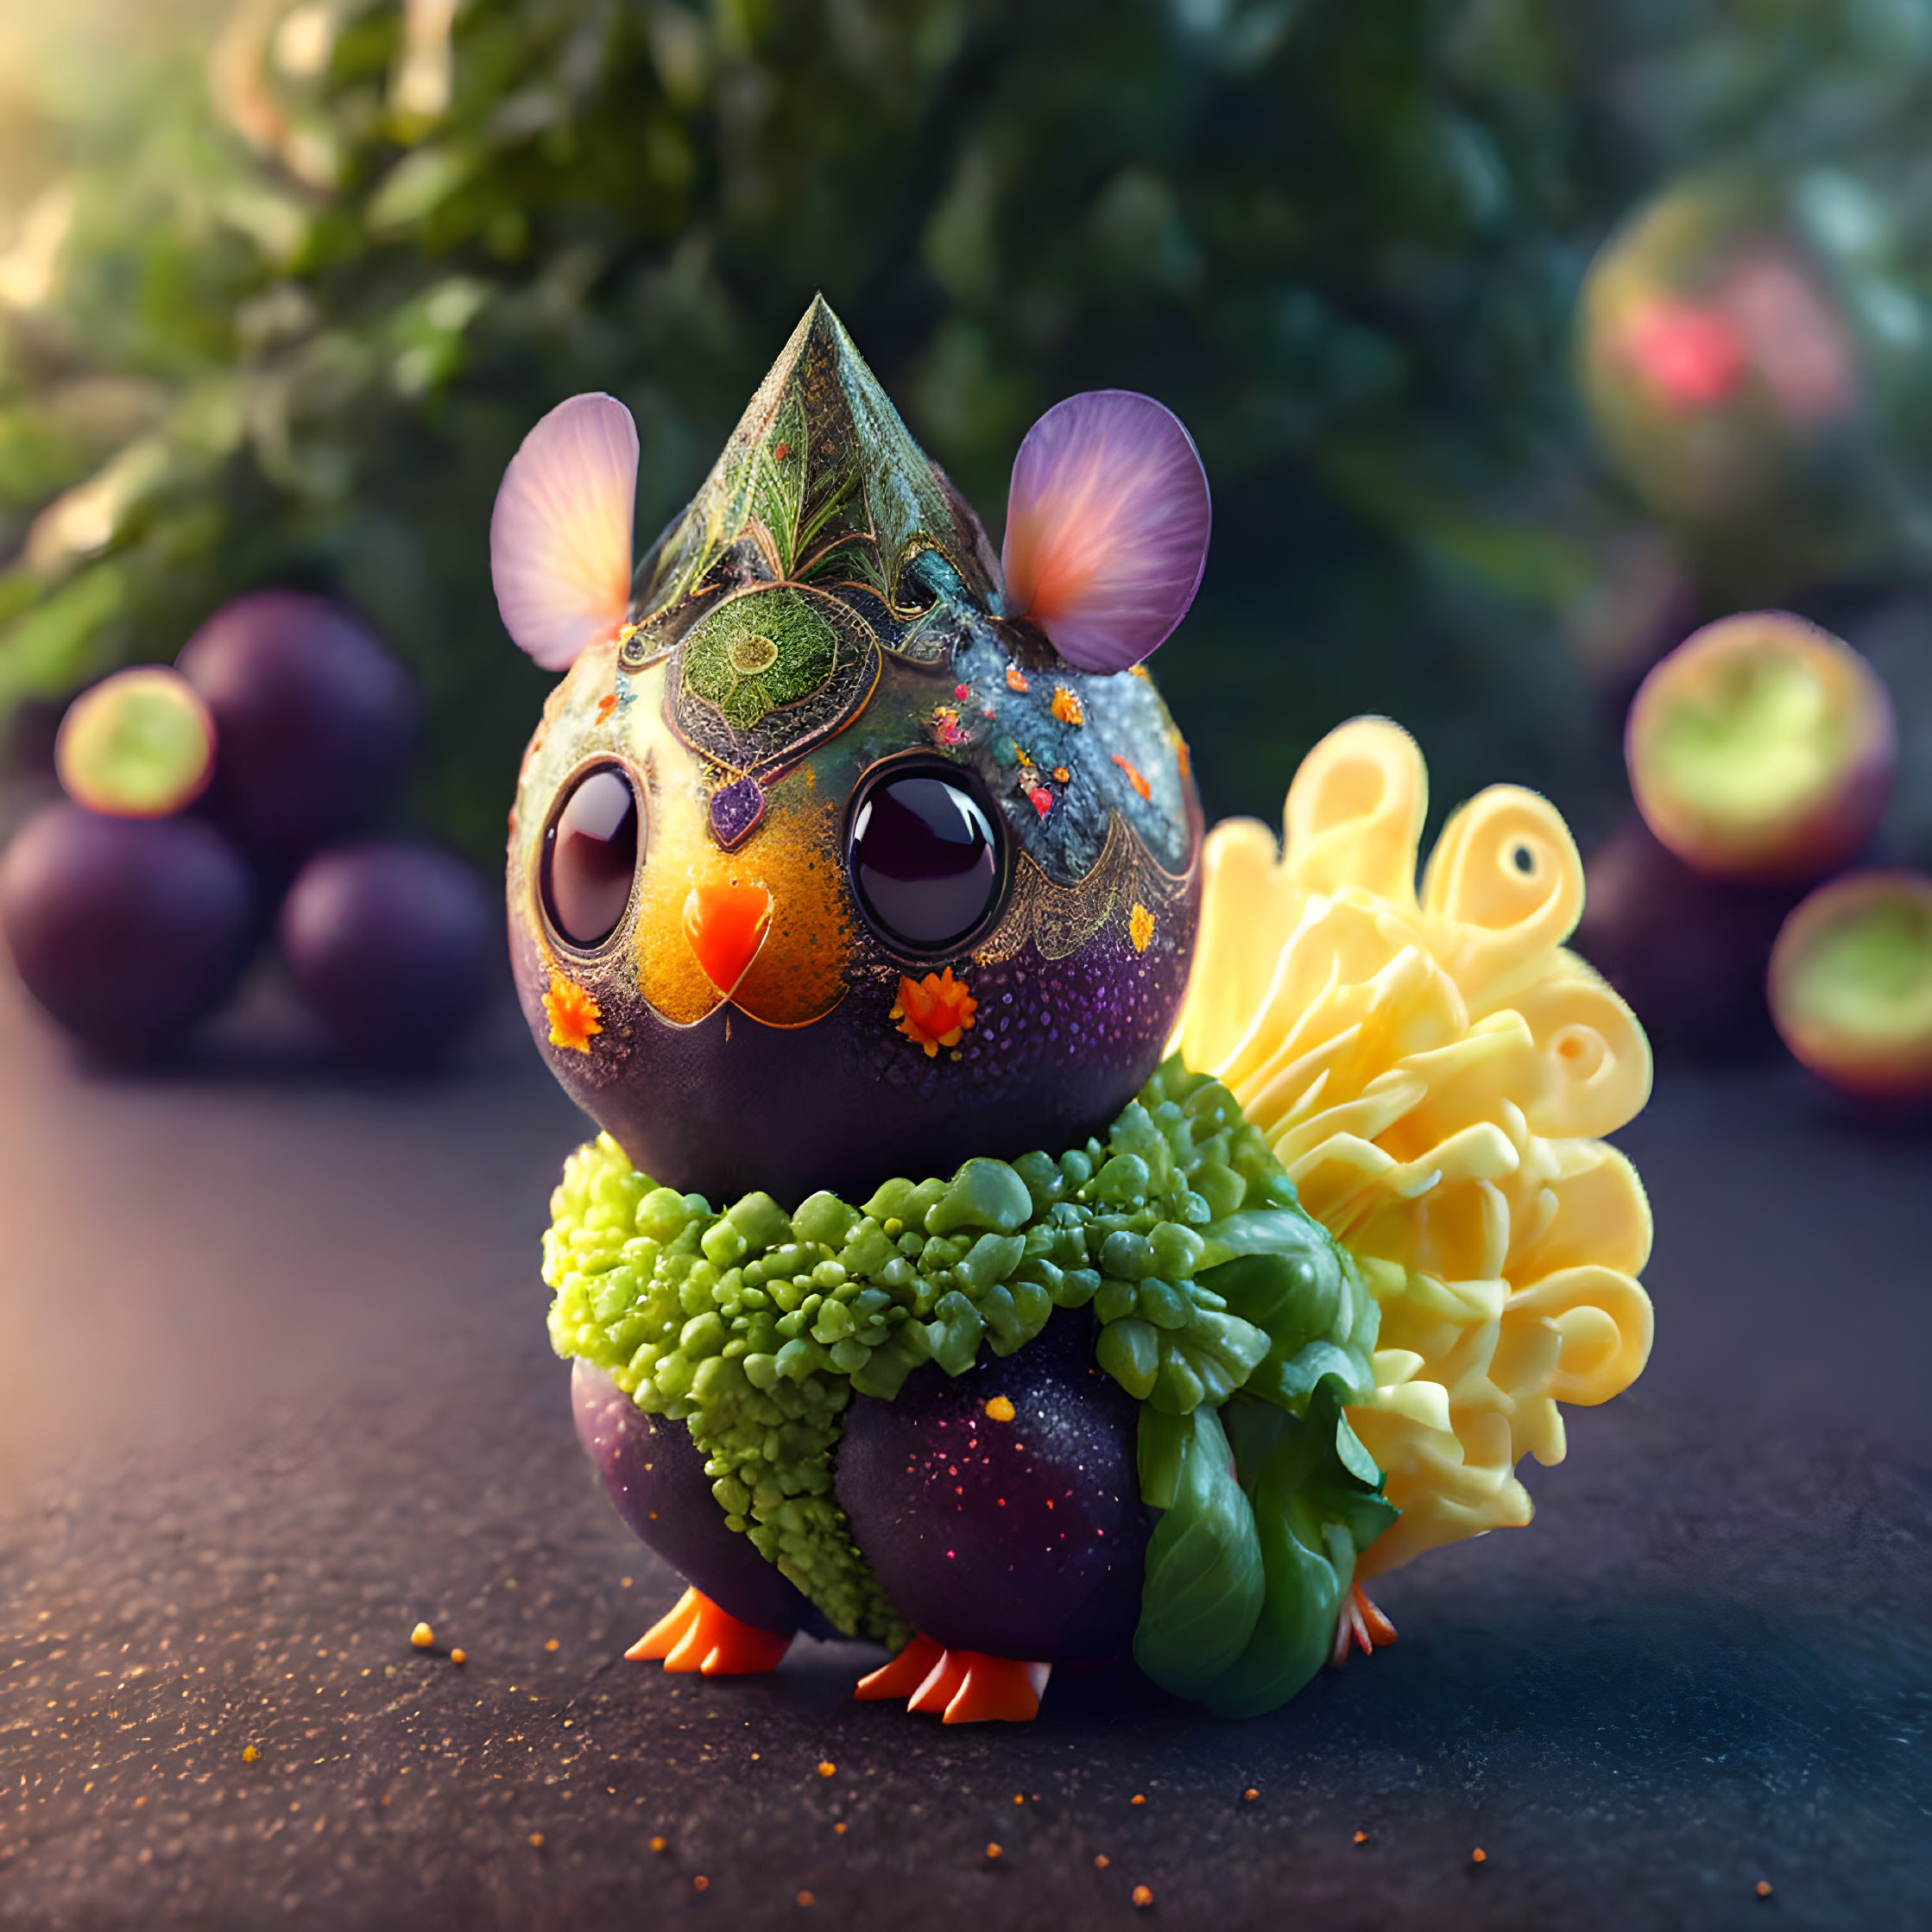 Cute creature,made from vegetables